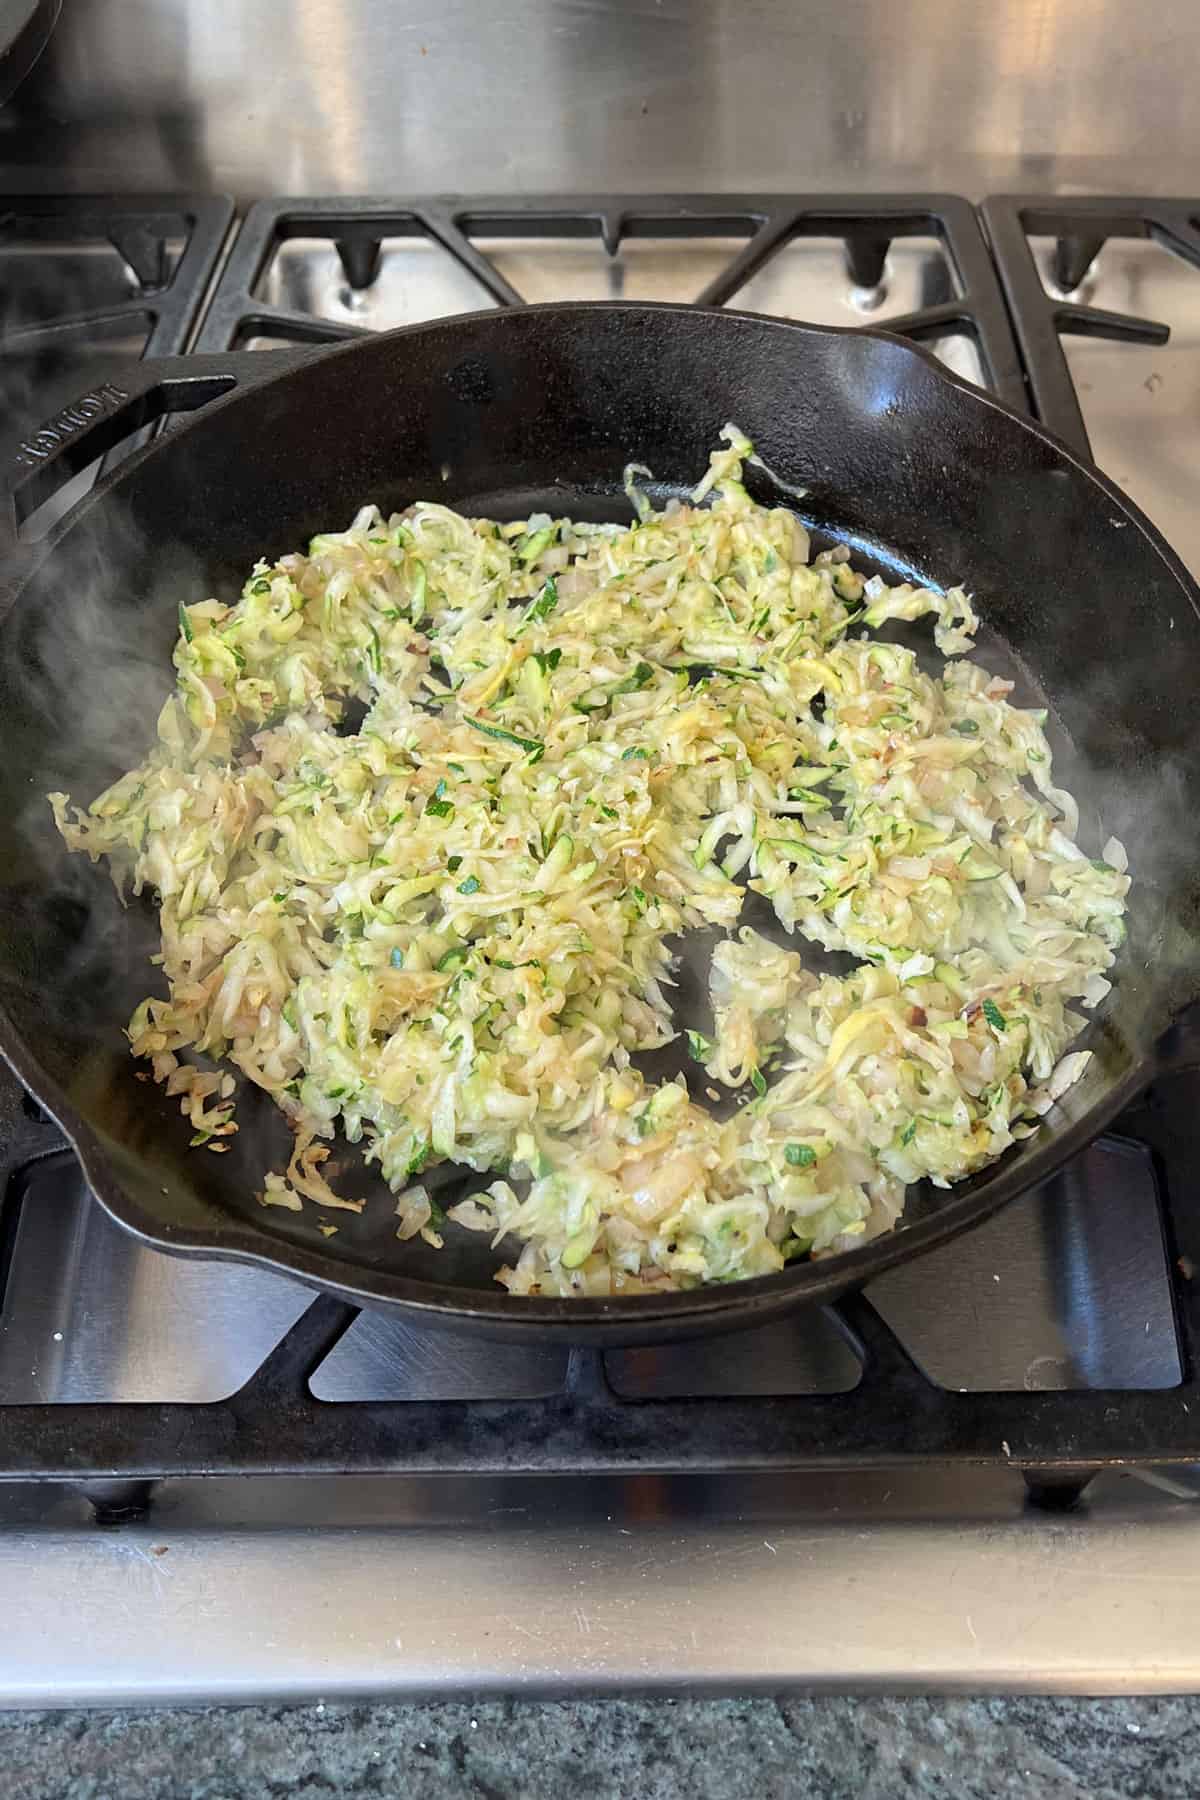 Shredded zucchini and summer squash cooking in a cast iron skillet